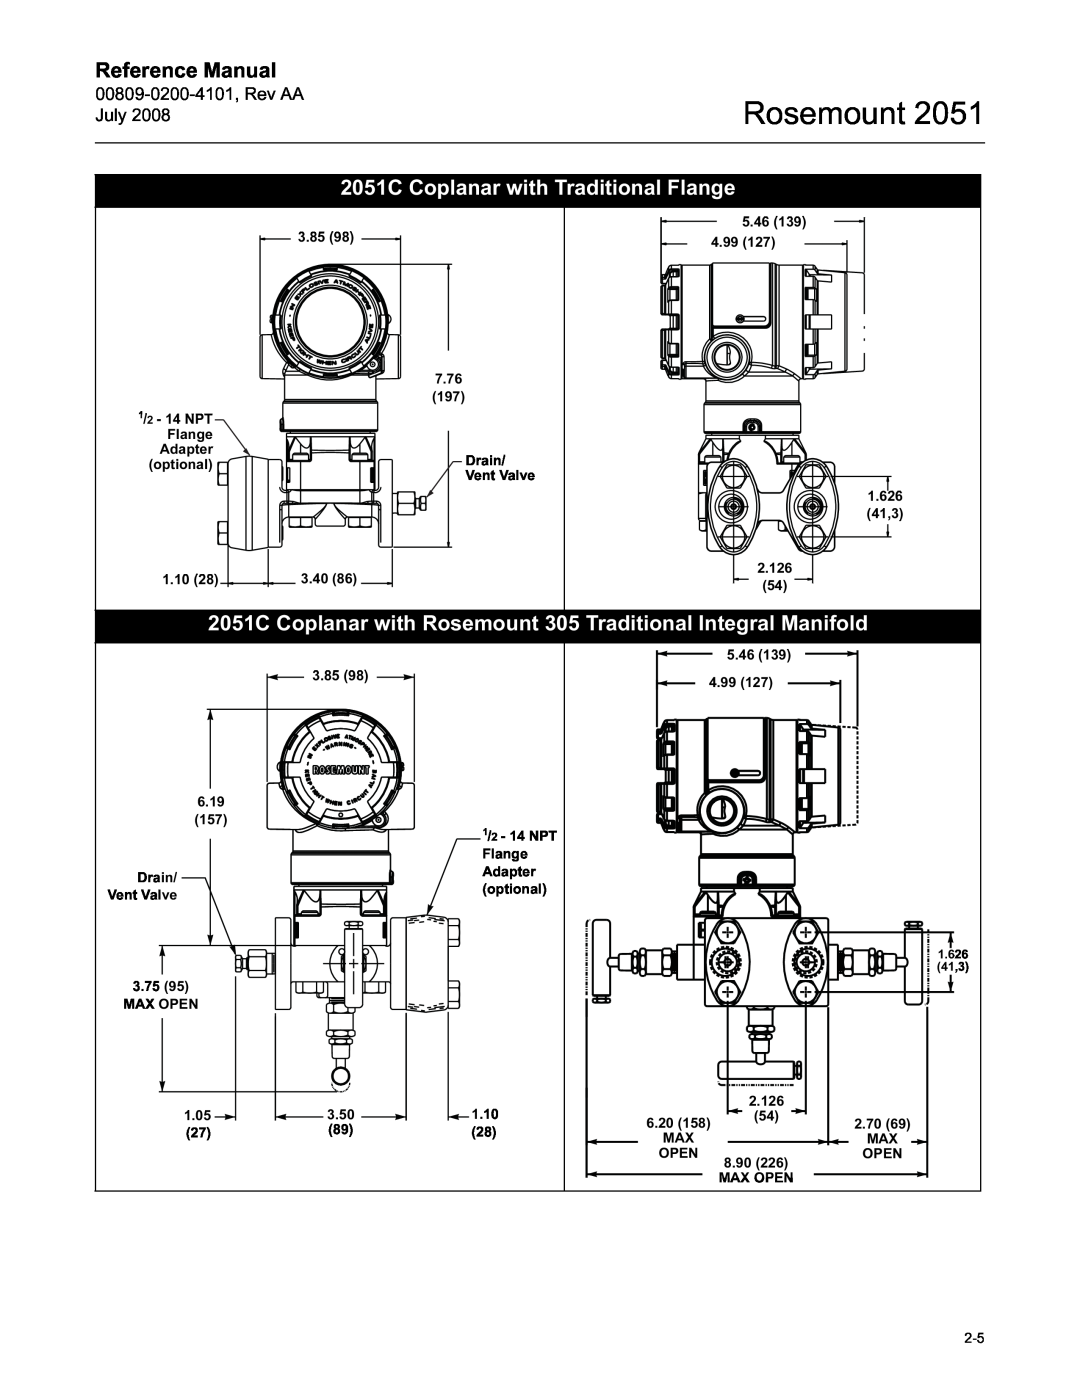 Emerson Process Management manual 2051C Coplanar with Traditional Flange, Rosemount, Reference Manual 